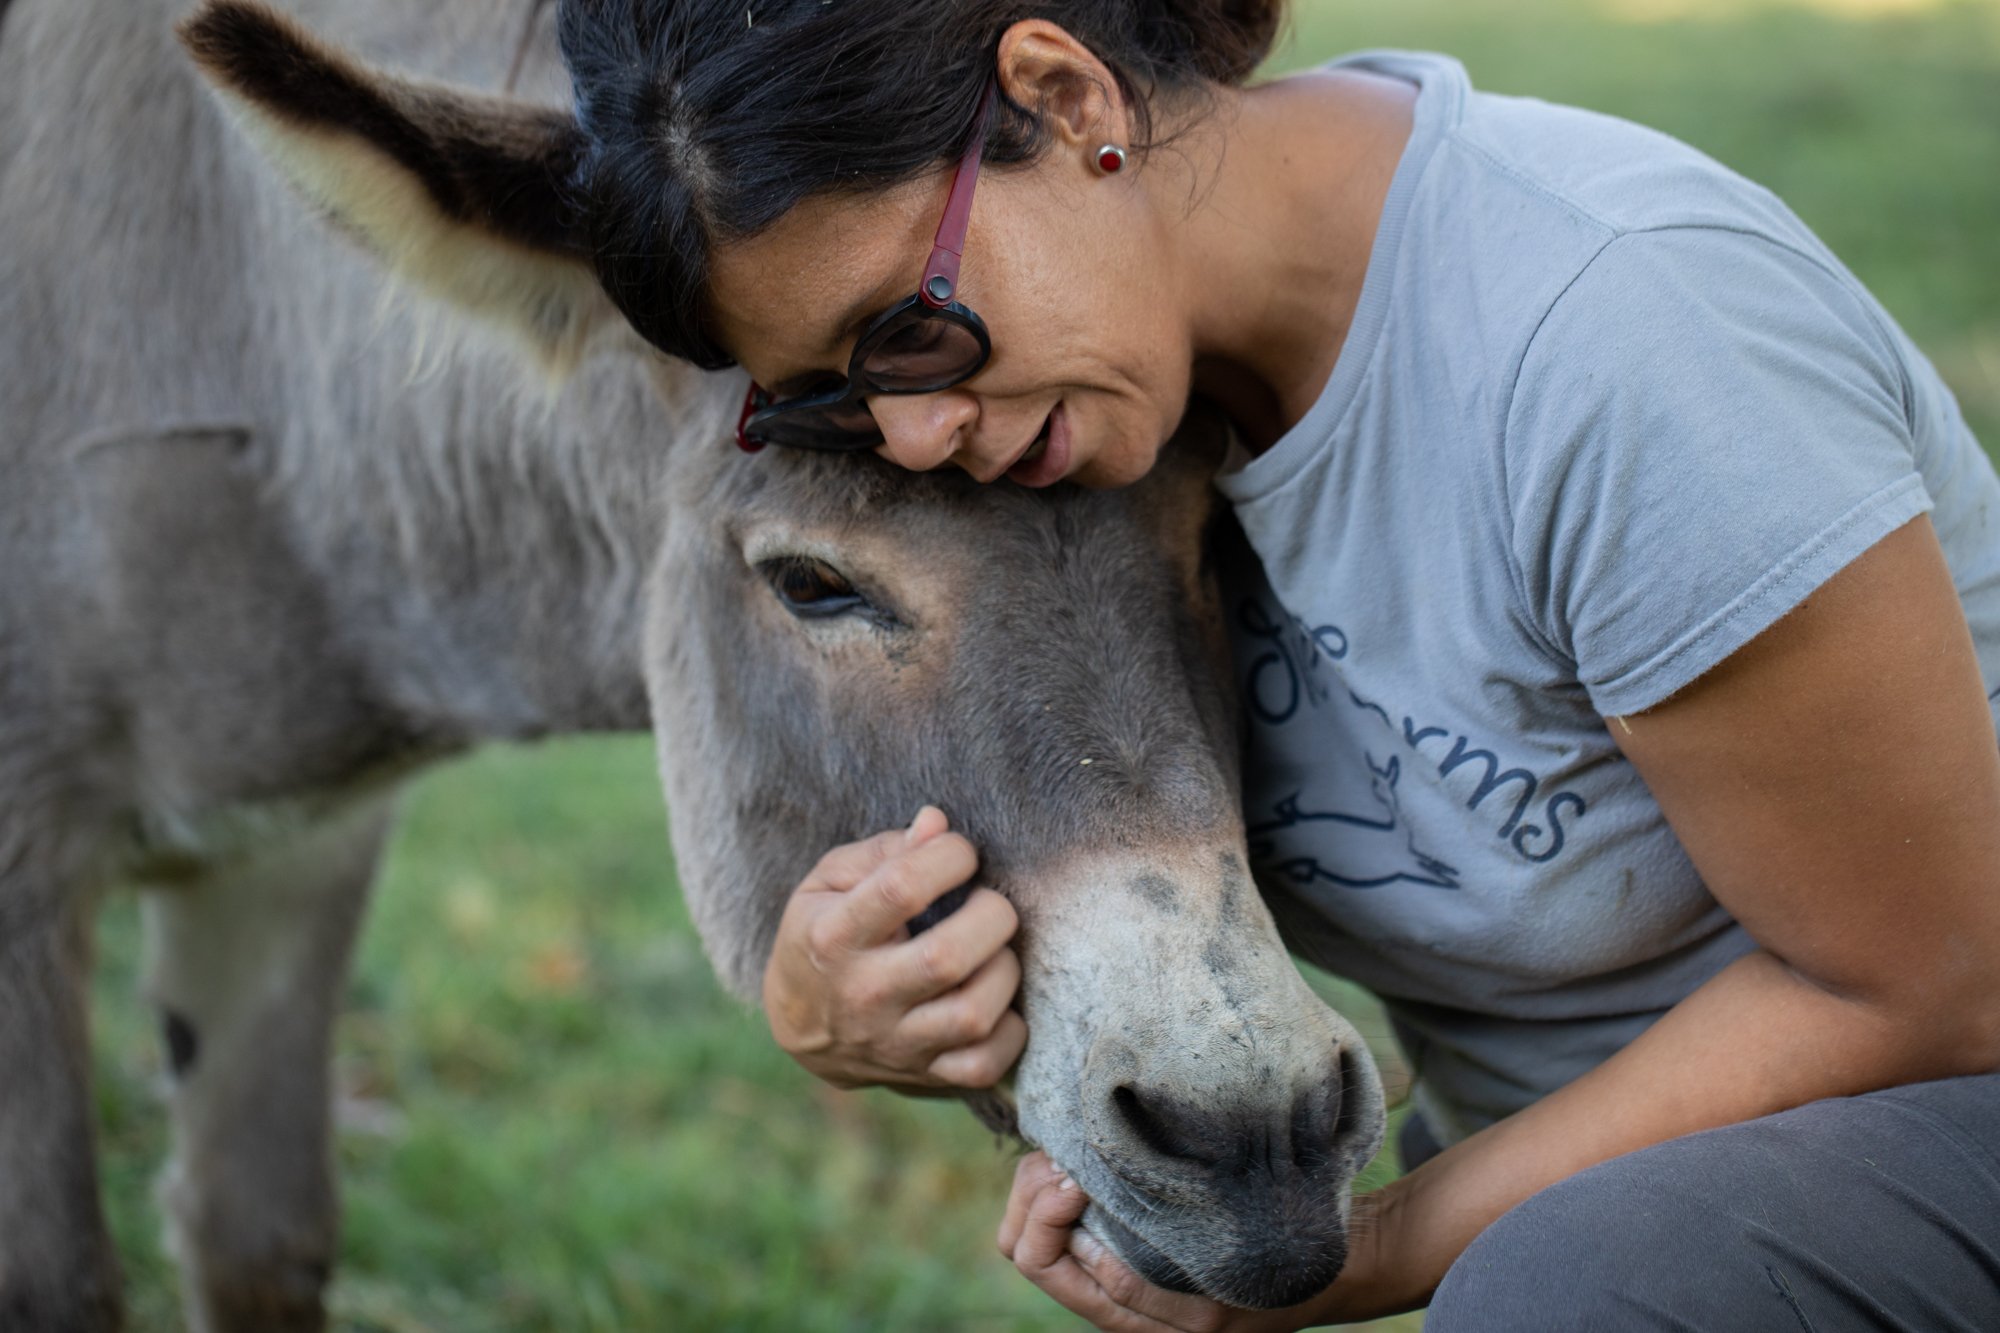  “Jojo is our guard donkey. He doesn’t really do a good job,” said Vergara. “Jojo neighs when something is wrong, and all the goats understand. But he’s currently overweight. Donkeys are desert animals. They didn’t evolve to have this much greenery a